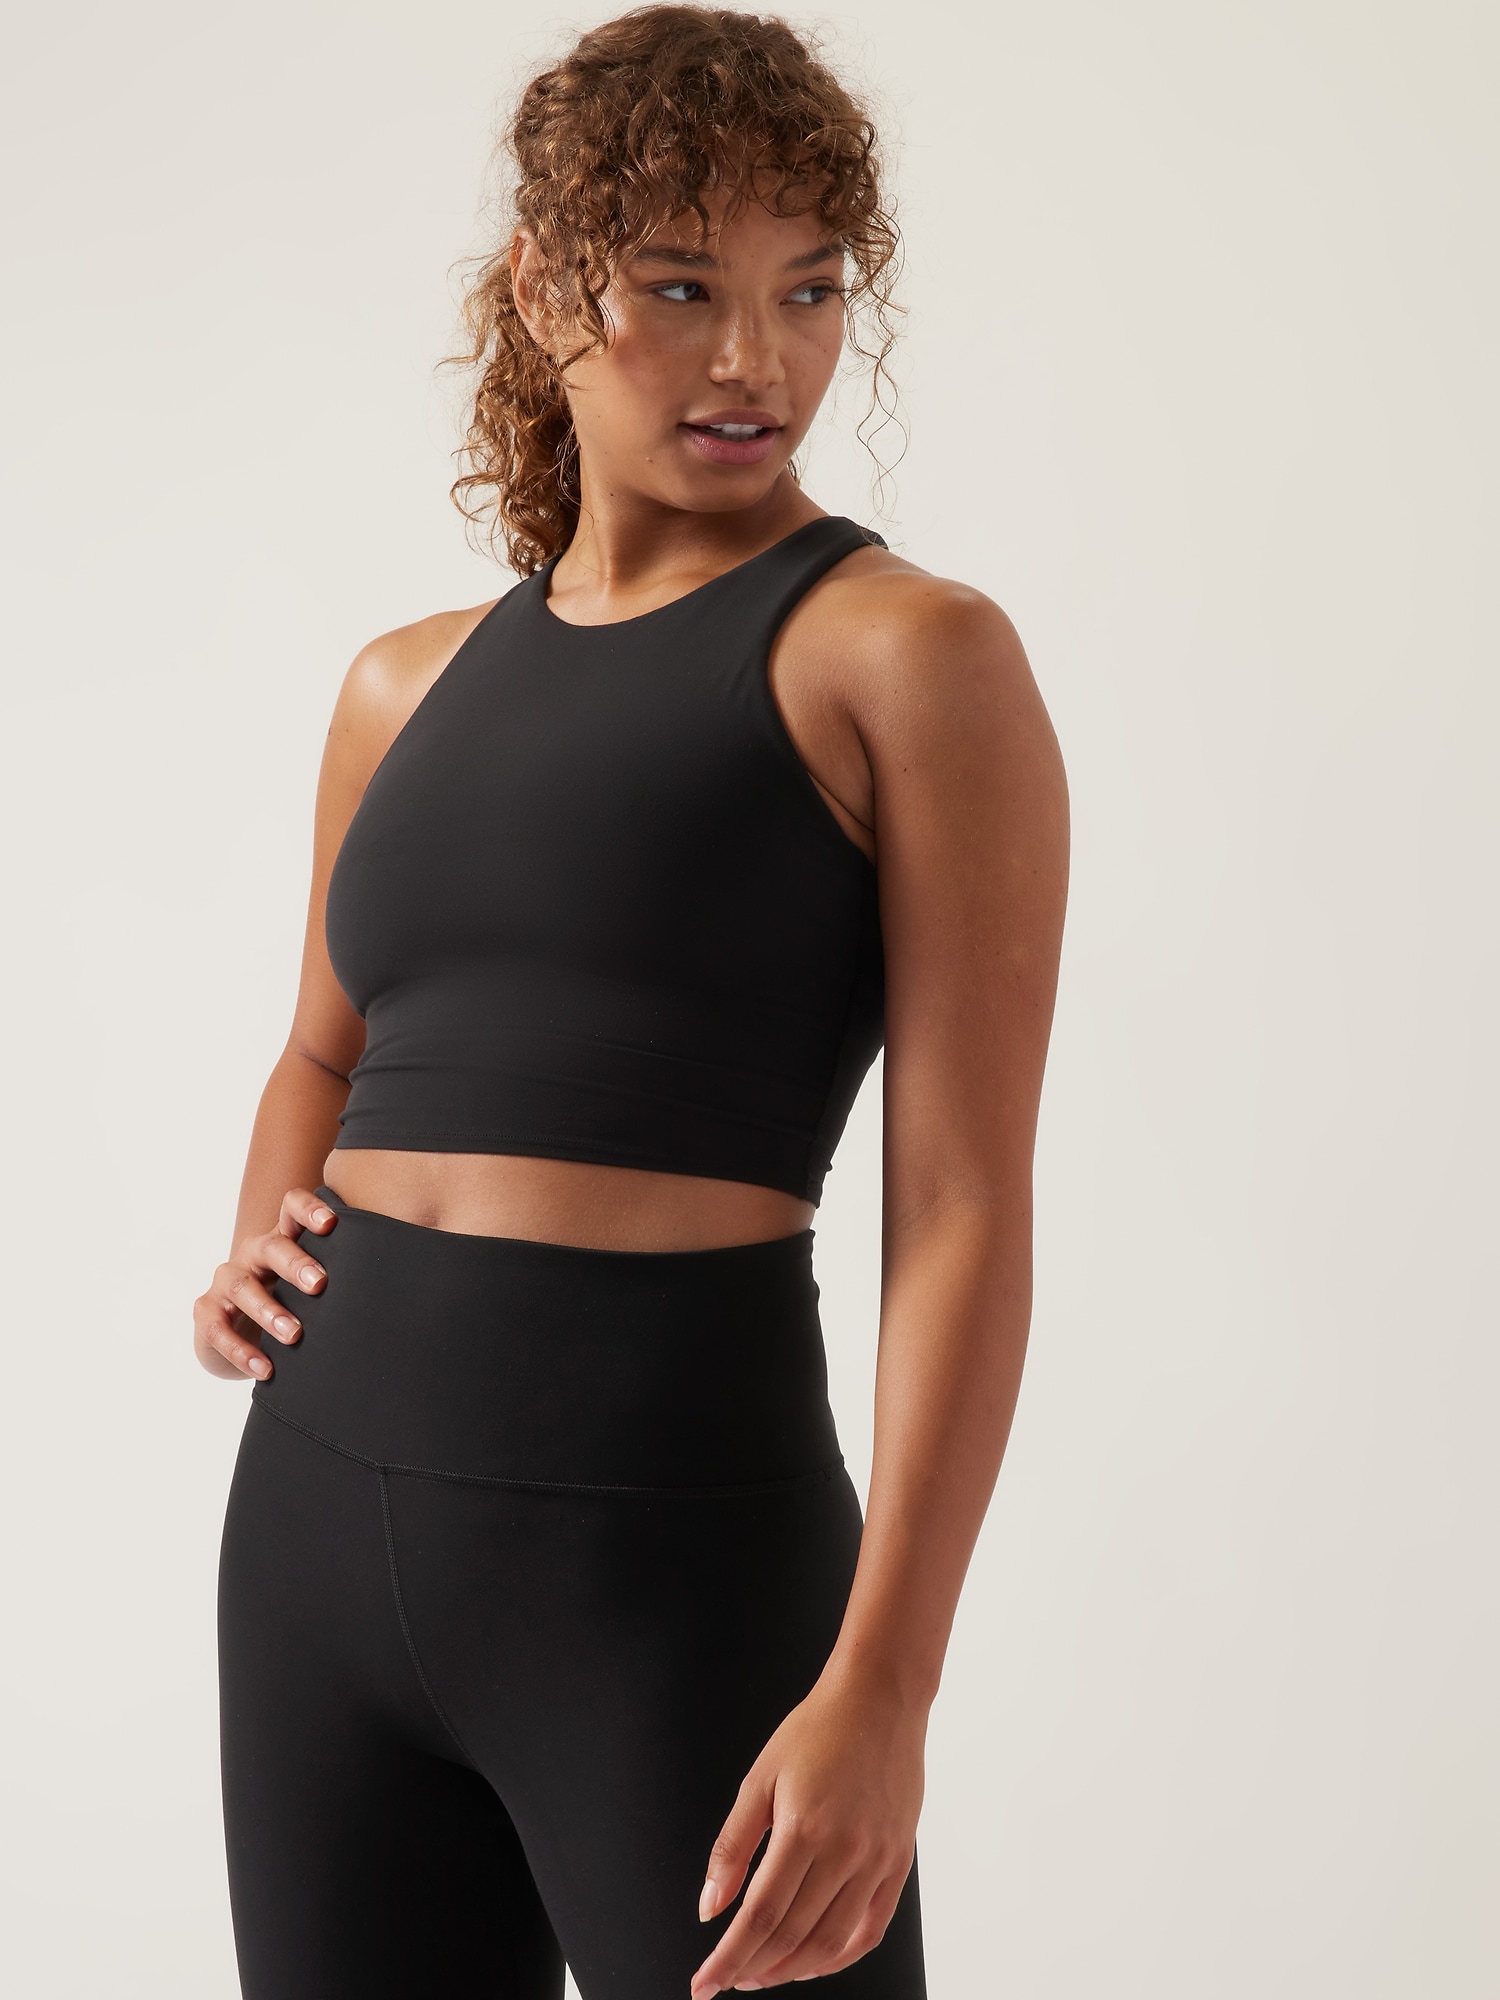 Rare price drop on 'buttery soft' activewear sold on  that shoppers  compare to Lululemon